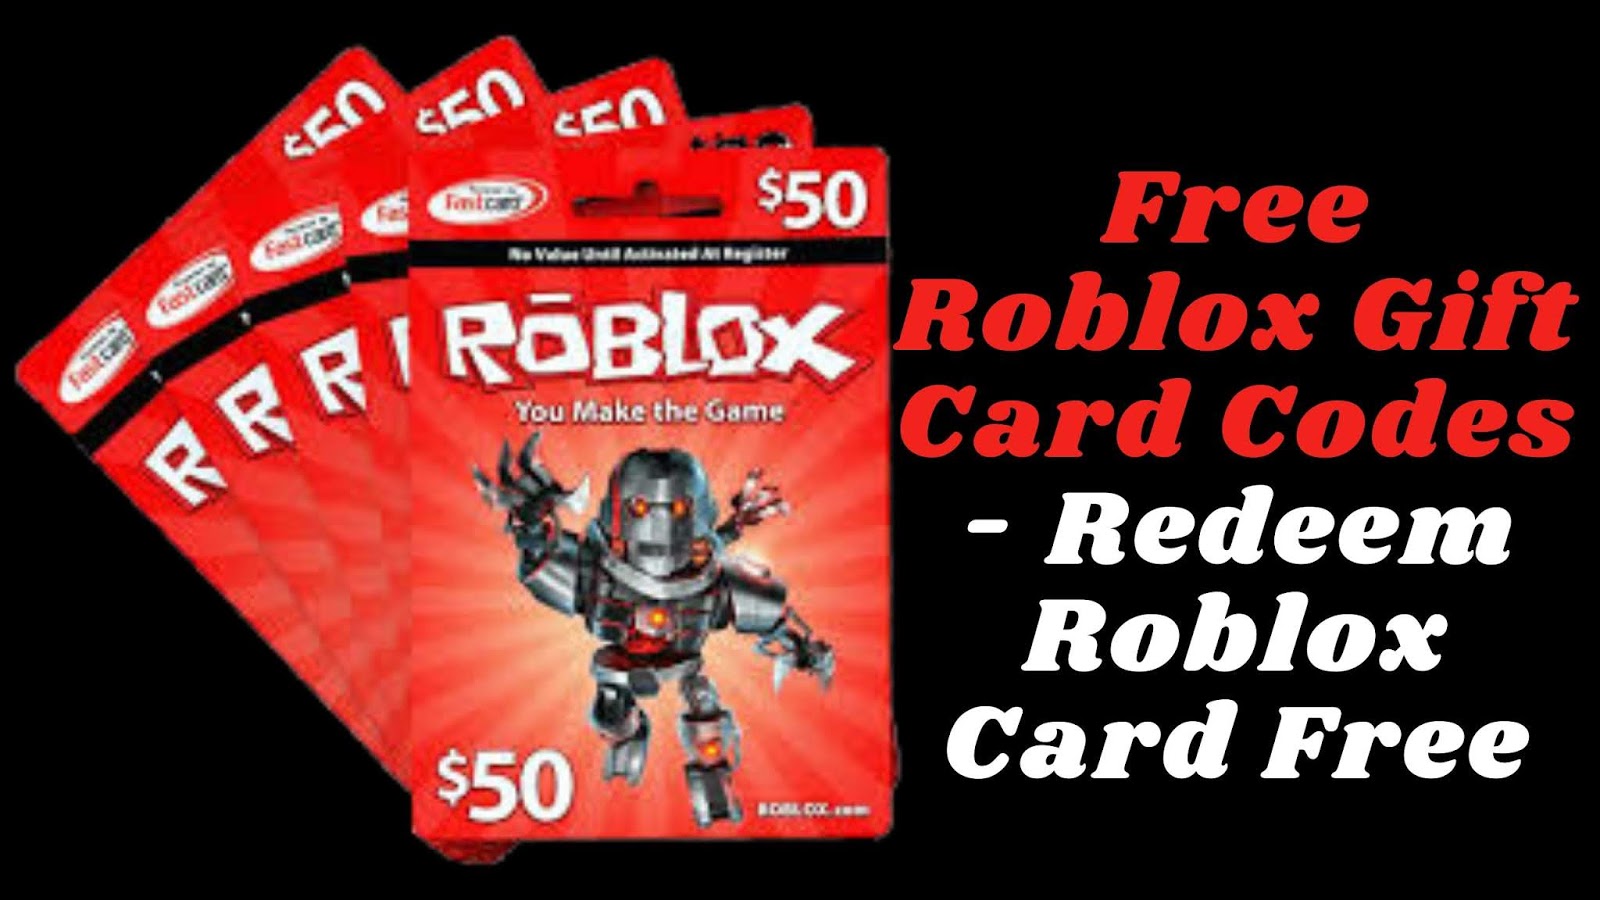 Free Gift Cards Free Roblox Gift Card Codes Redeem Roblox Card Free - roblox cards redeem free